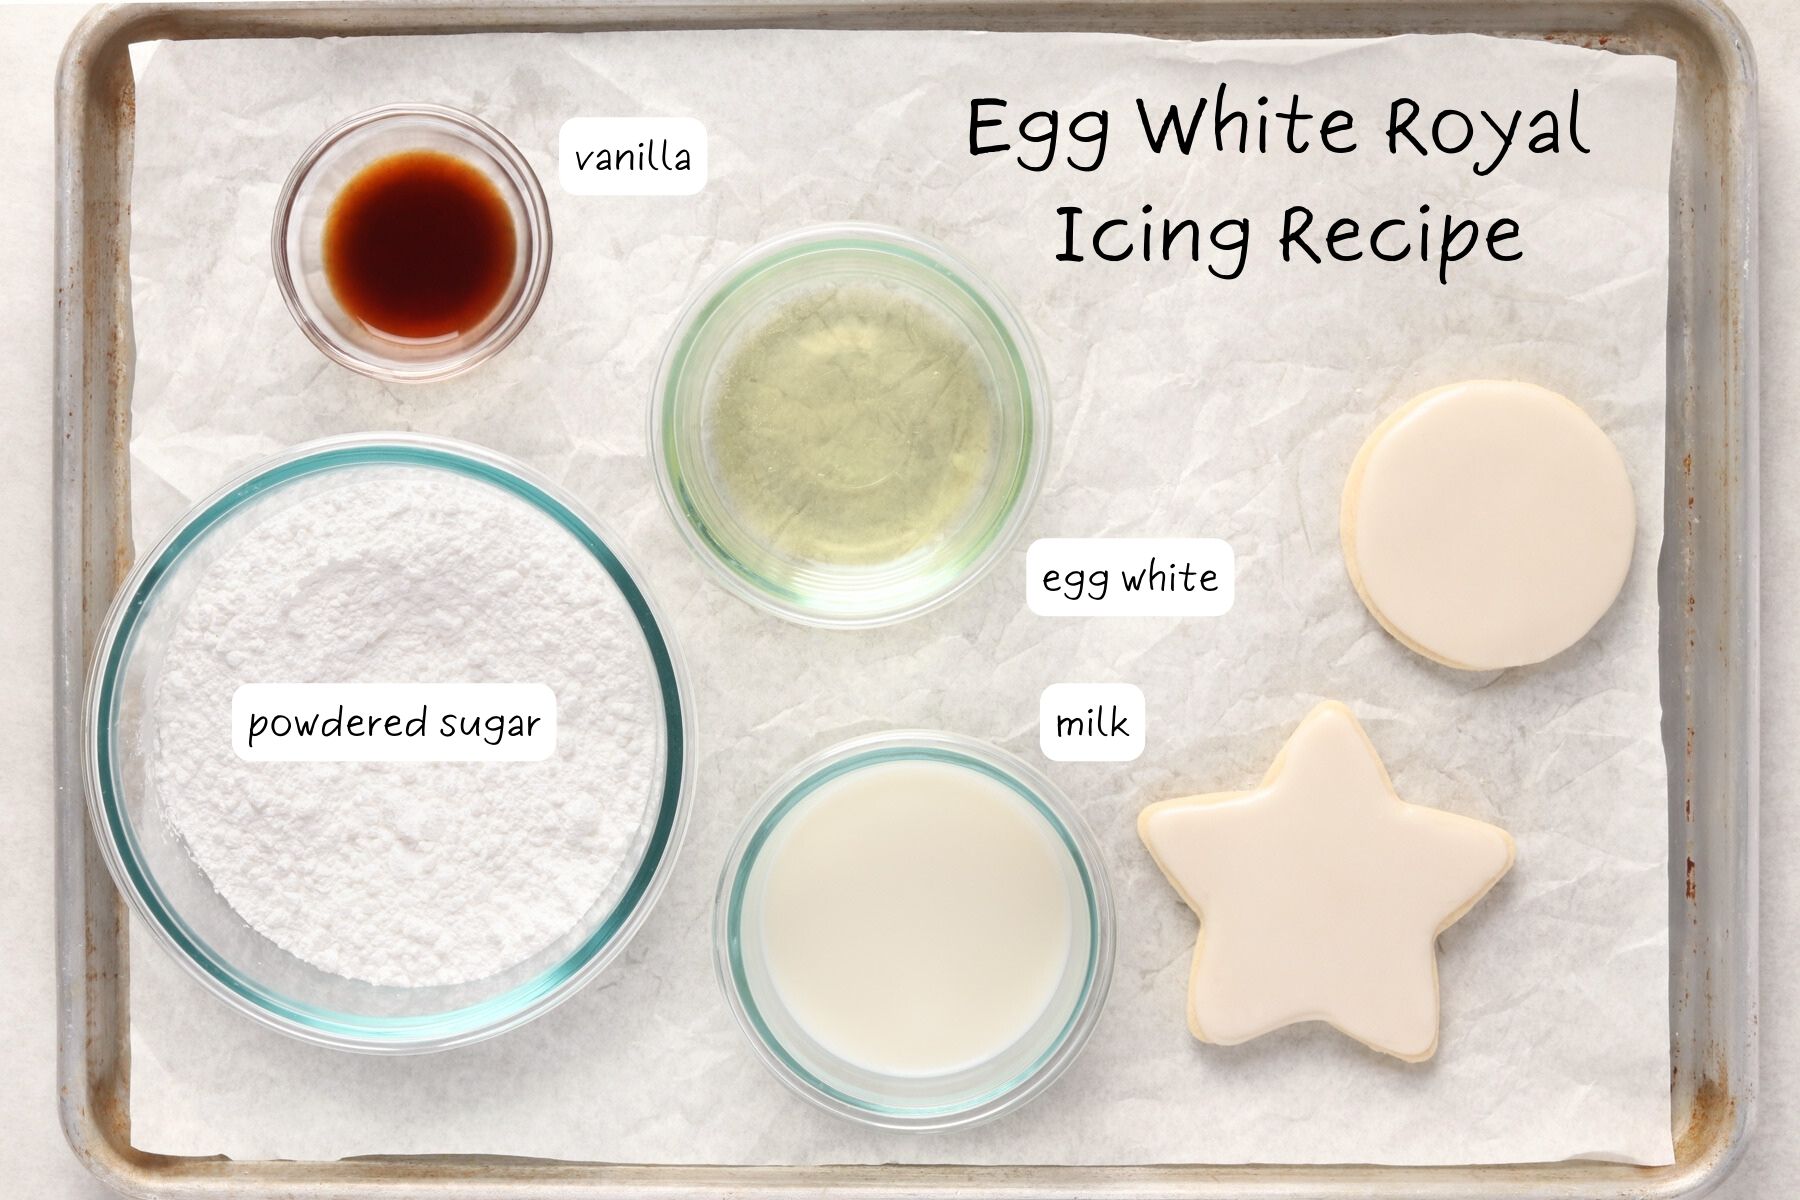 Ingredients for royal icing made without meringue powder. Vanilla, egg whites, powdered sugar and milk.